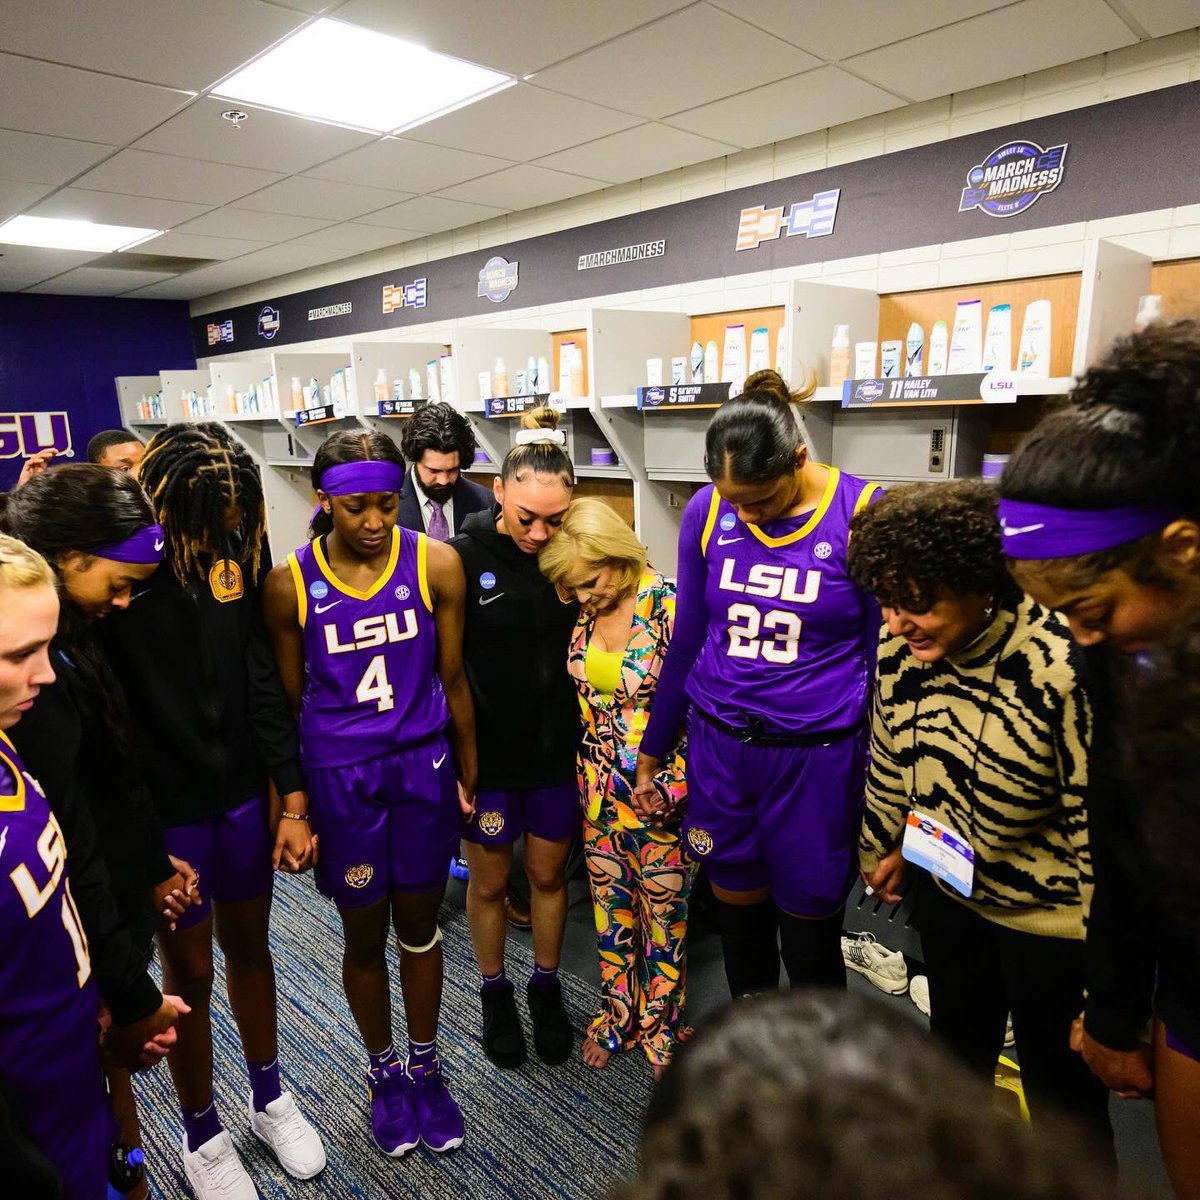 So many moments behind the scenes that people don’t see. Thankful for all the ways God is working. I love this team. @LSUwbkb #EliteEight